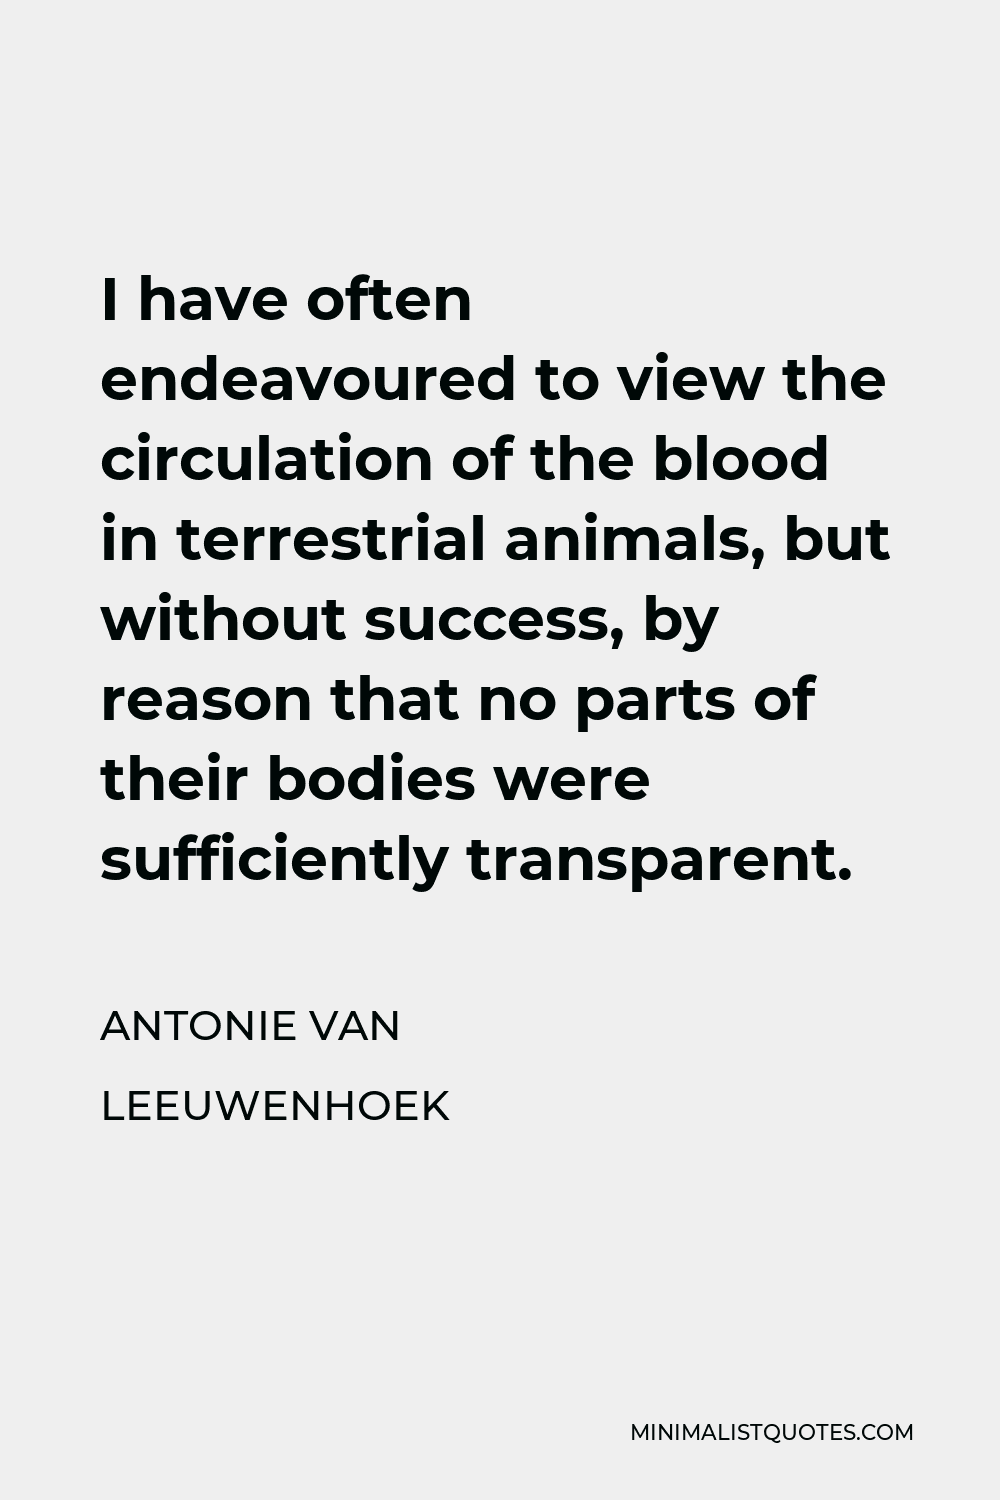 Antonie van Leeuwenhoek Quote - I have often endeavoured to view the circulation of the blood in terrestrial animals, but without success, by reason that no parts of their bodies were sufficiently transparent.